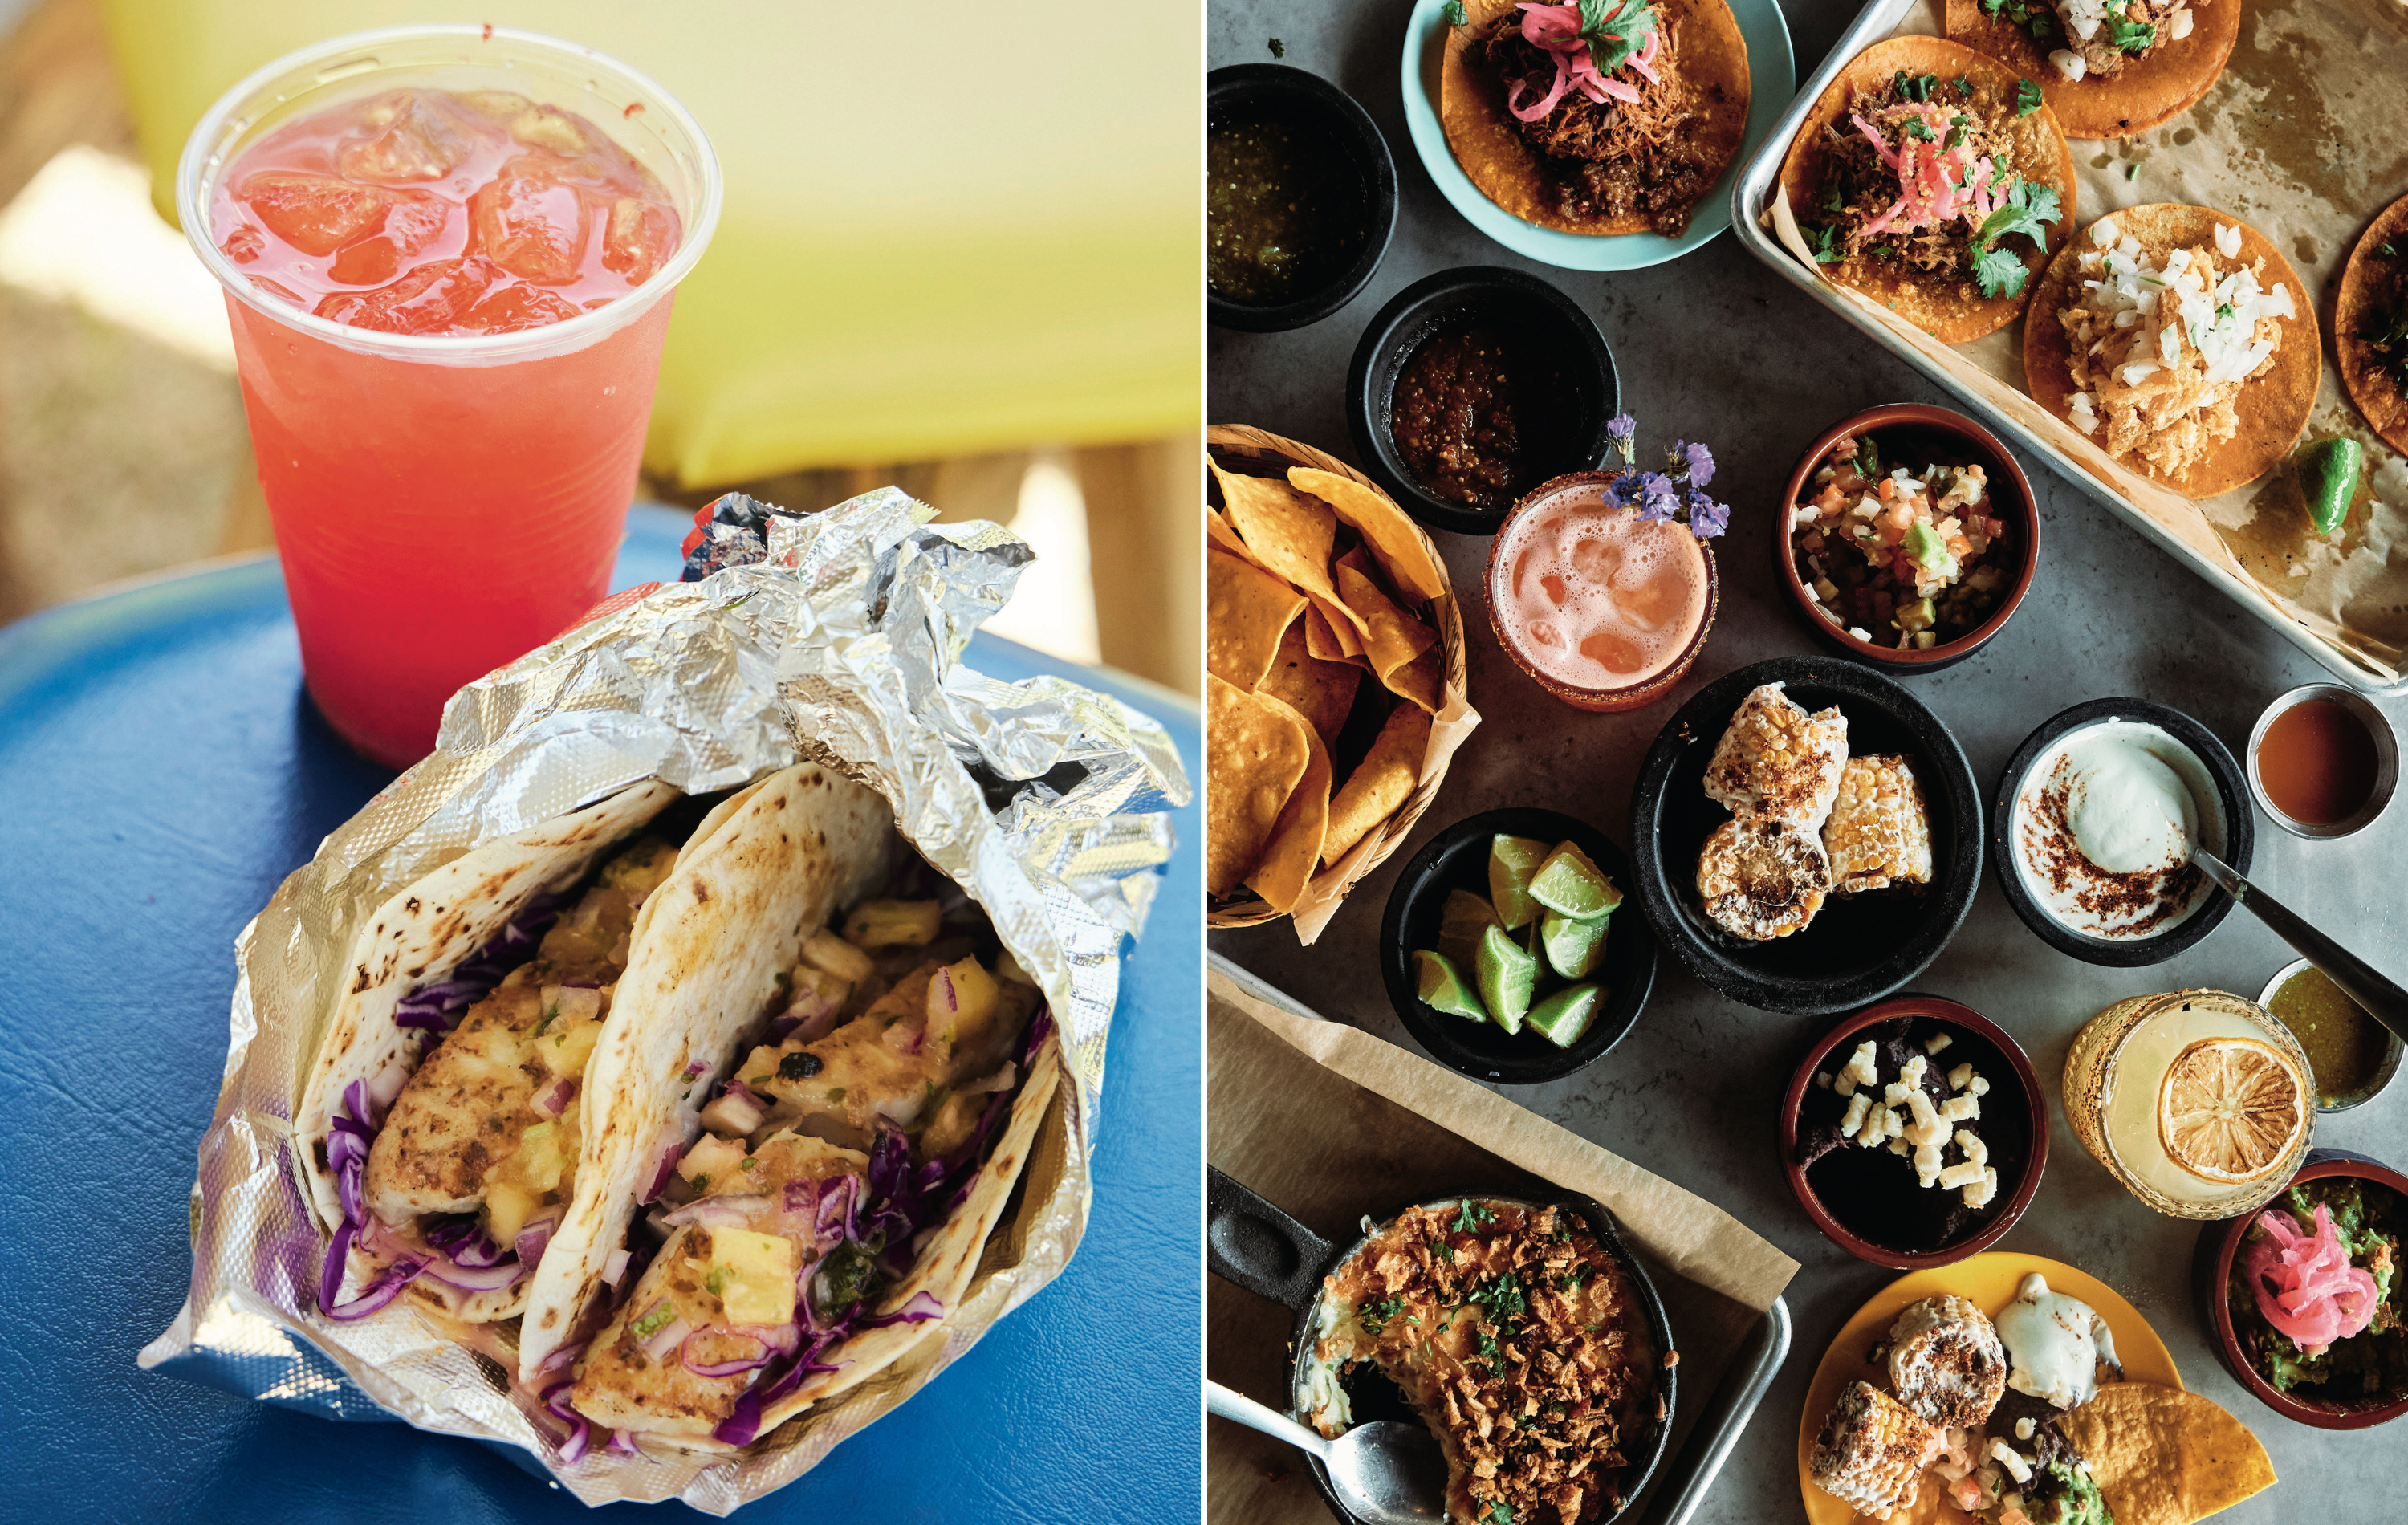 A collage of two images. Left: Two tacos wrapped in foil with a red drink in a plastic cup behind it. Right: A spread of chips, corn, dips, drinks, and tacos on a concrete tabletop.